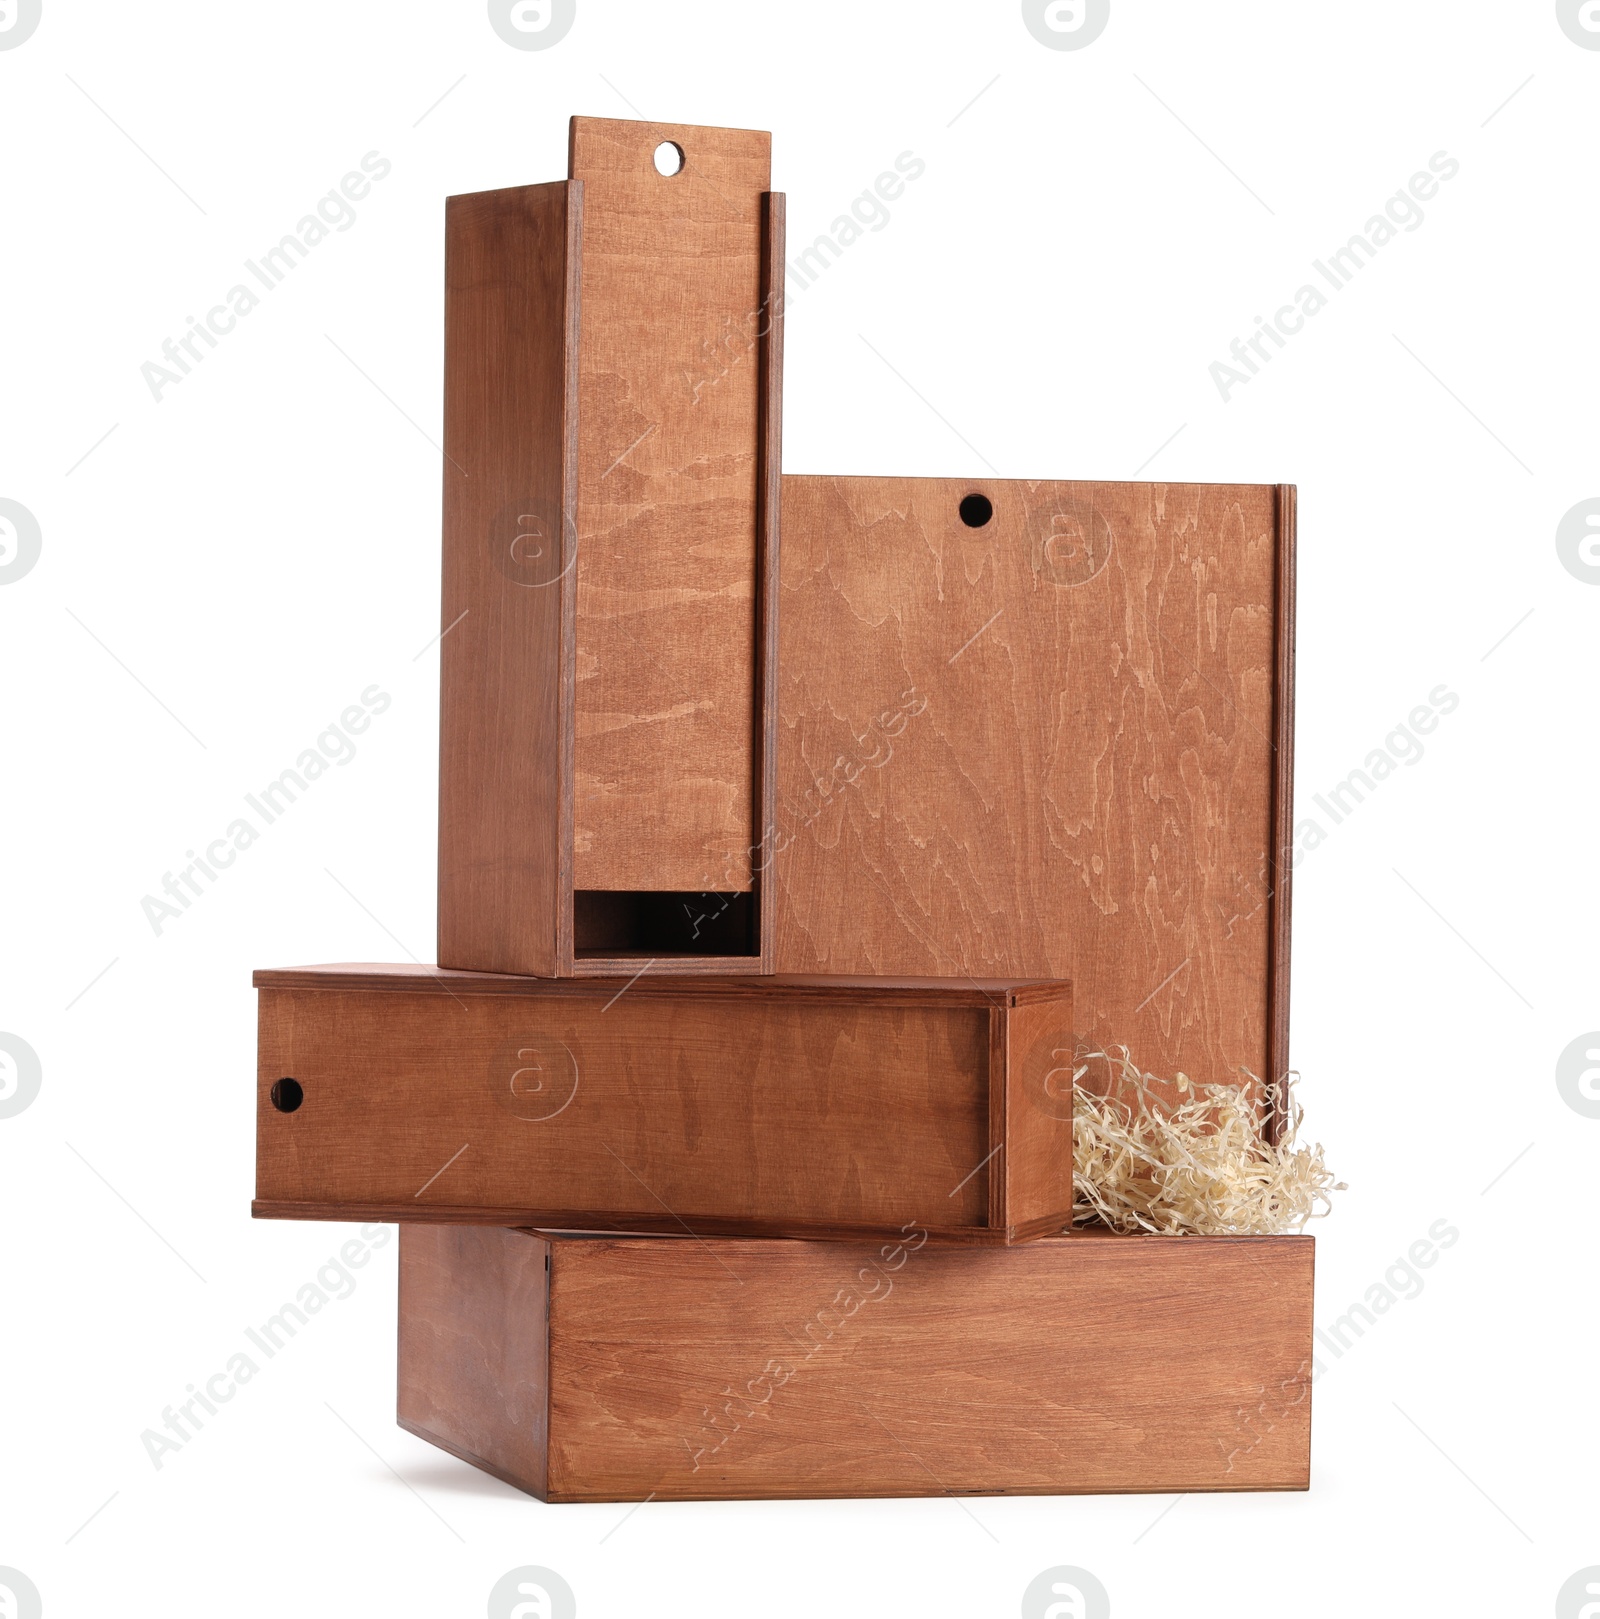 Photo of Open wooden wine boxes with straw isolated on white